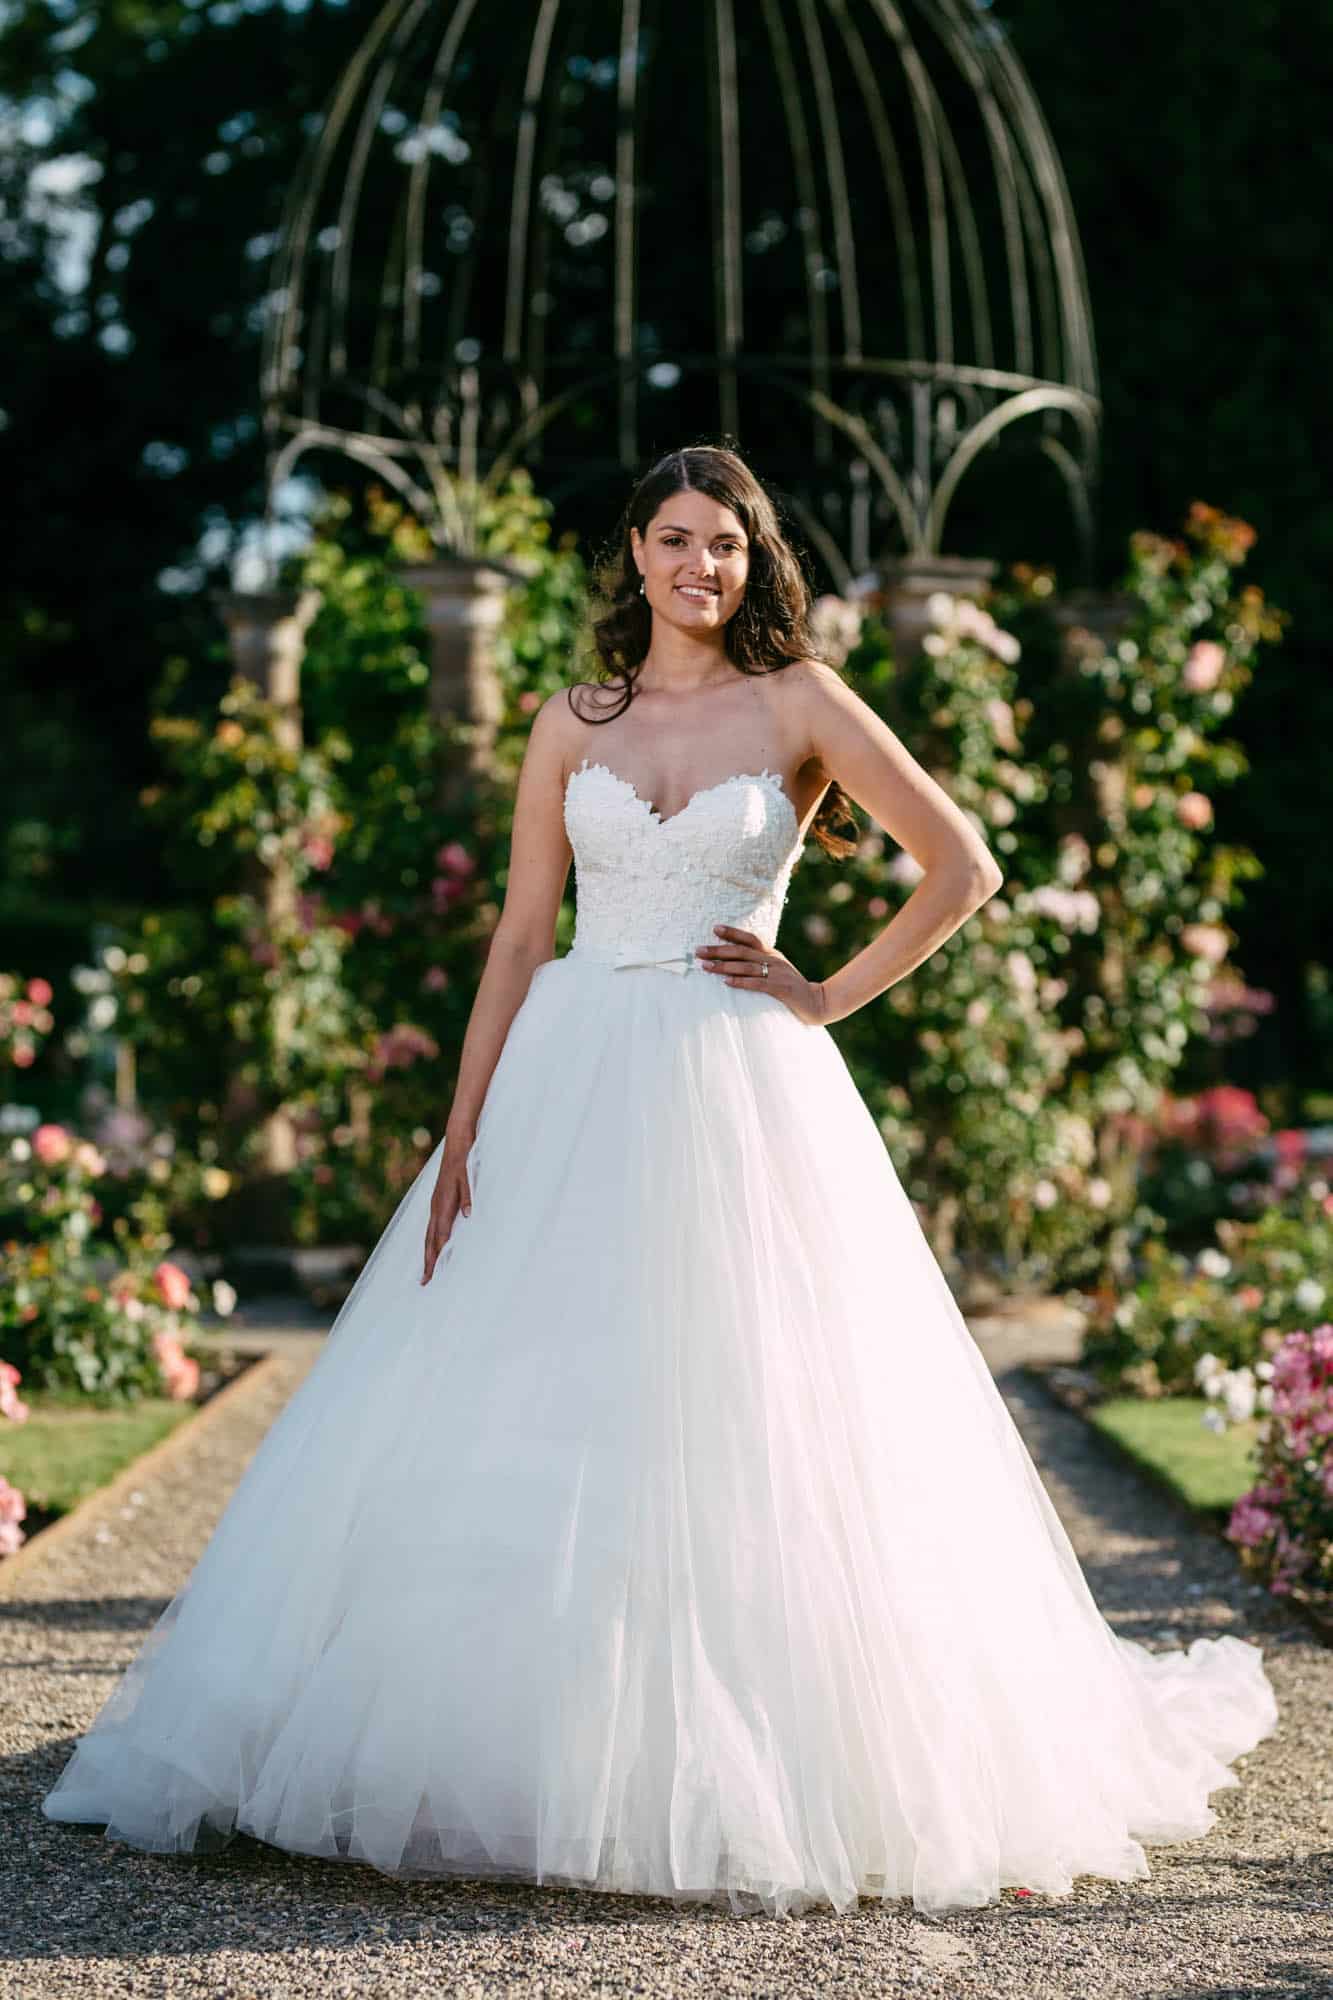 A woman in a wedding dress poses in front of a garden, wearing an elegant A-line gown.